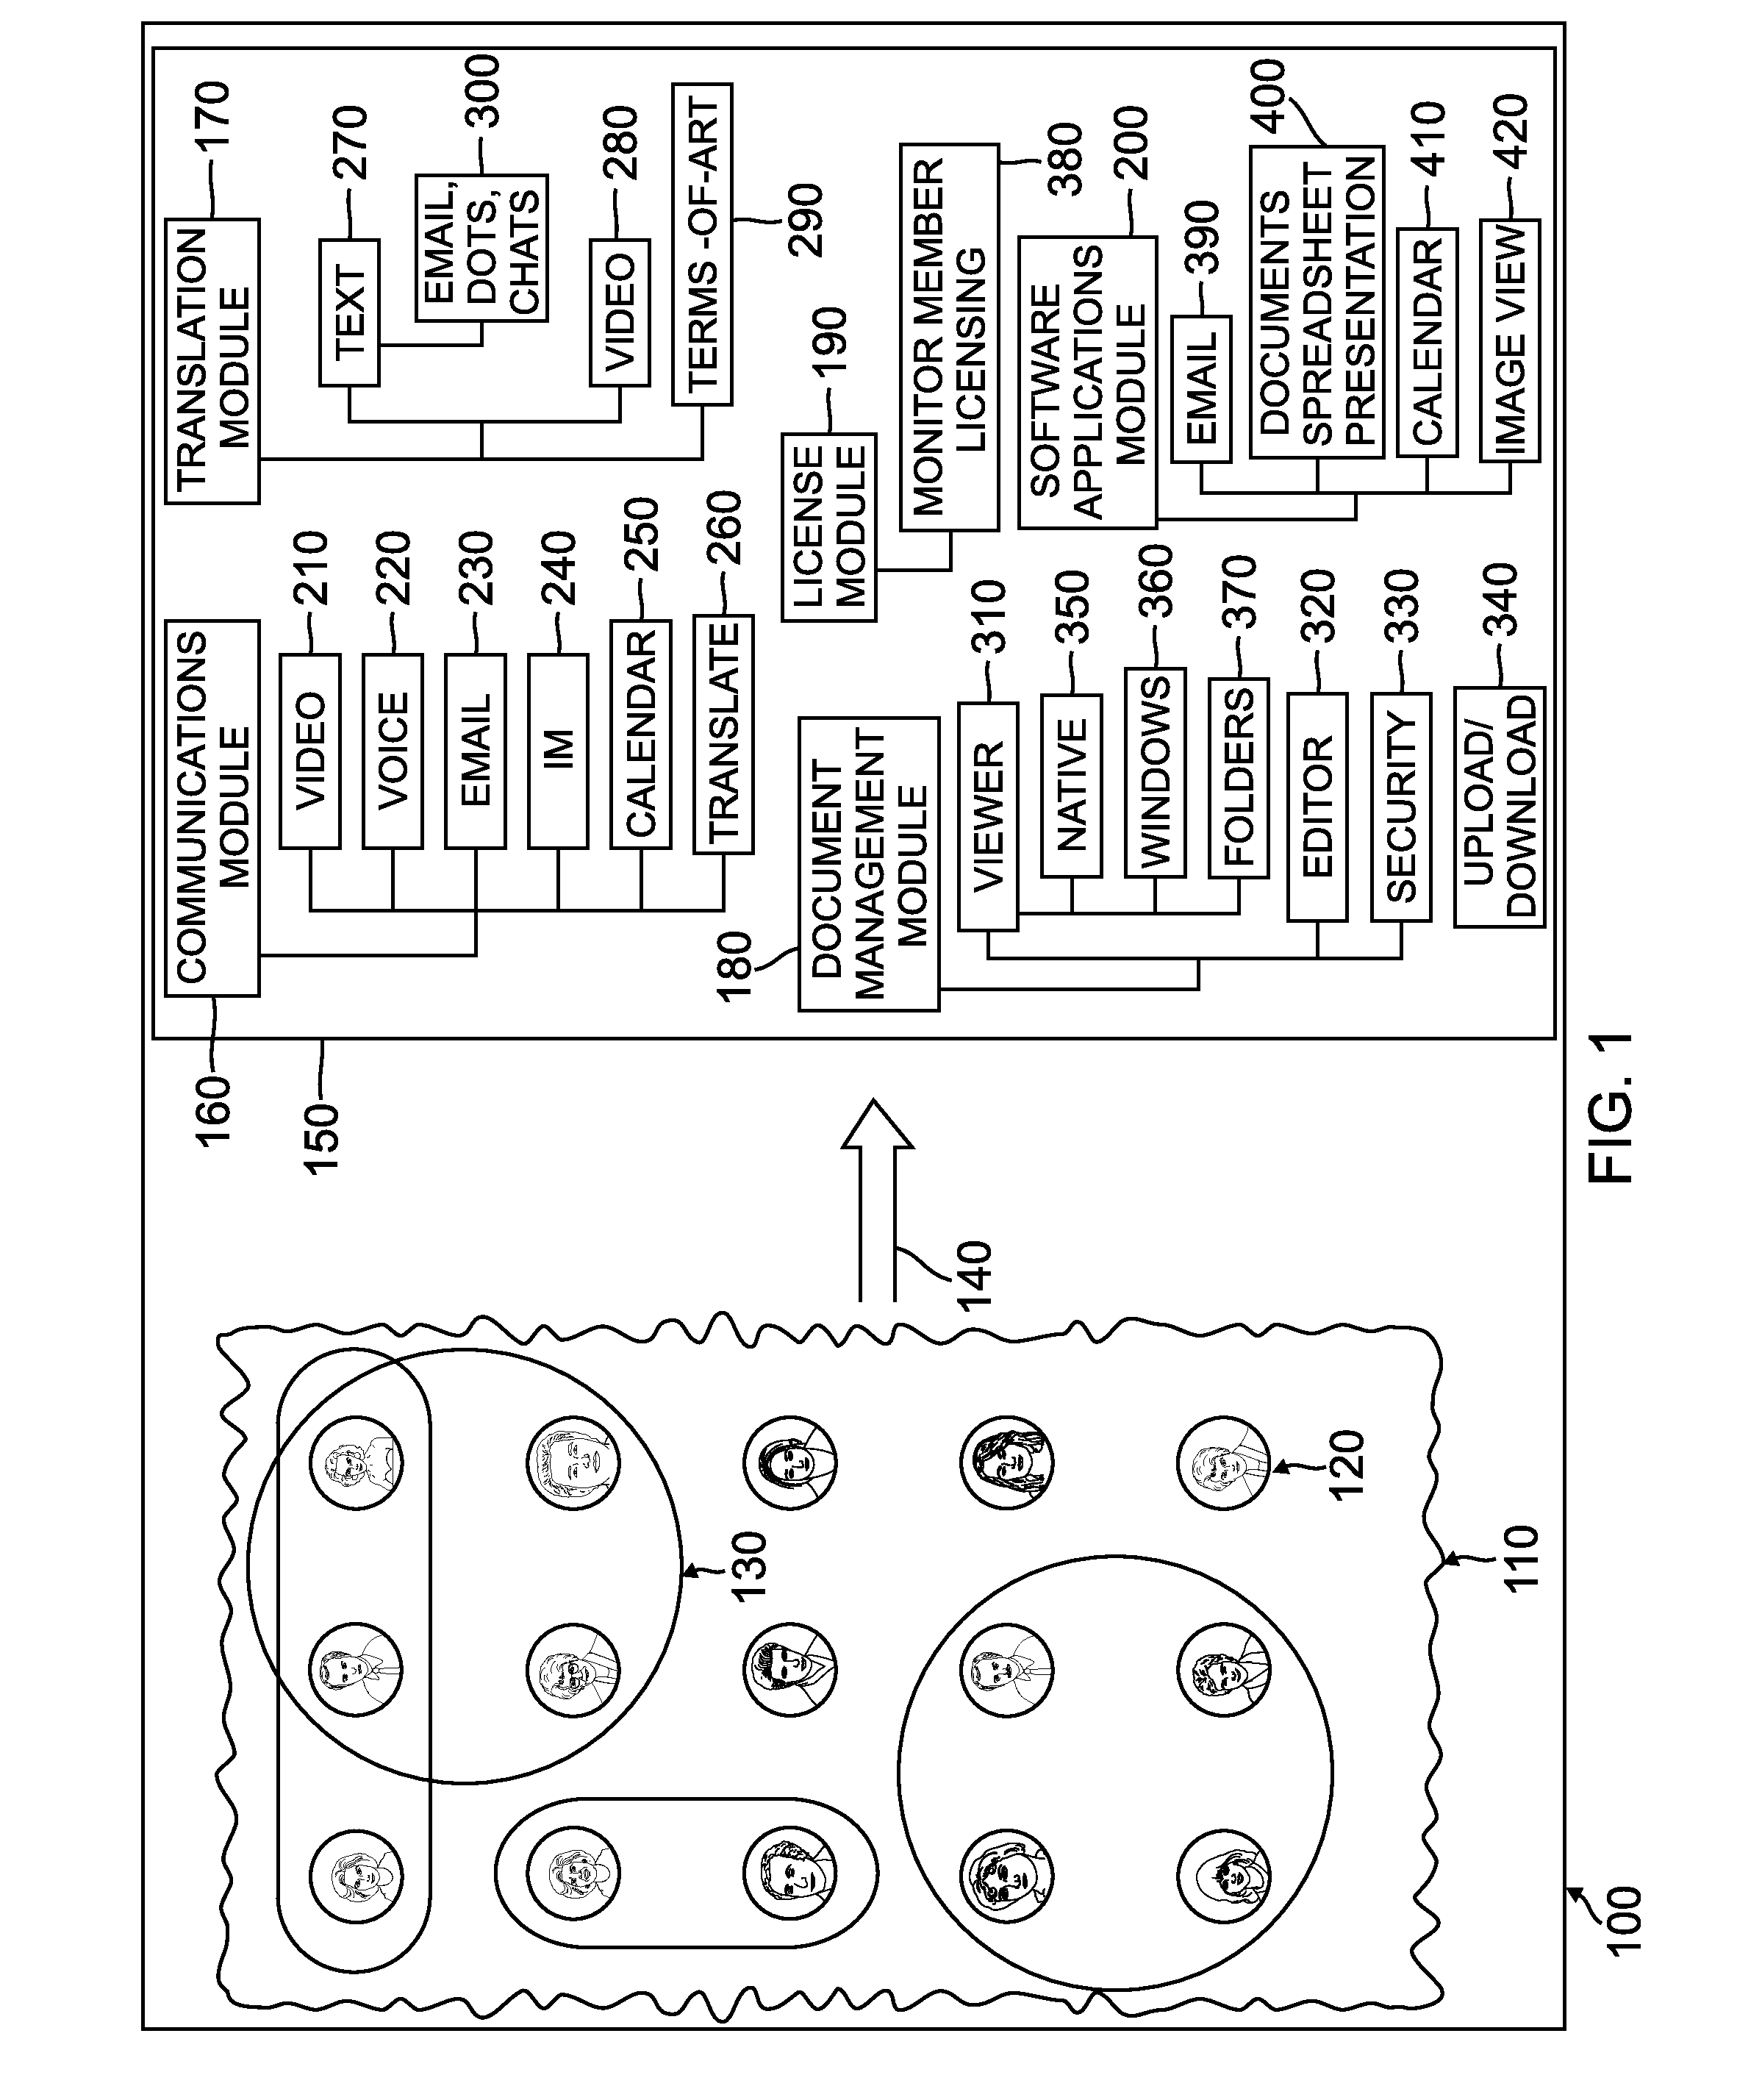 Method for providing alias folders in a document management system